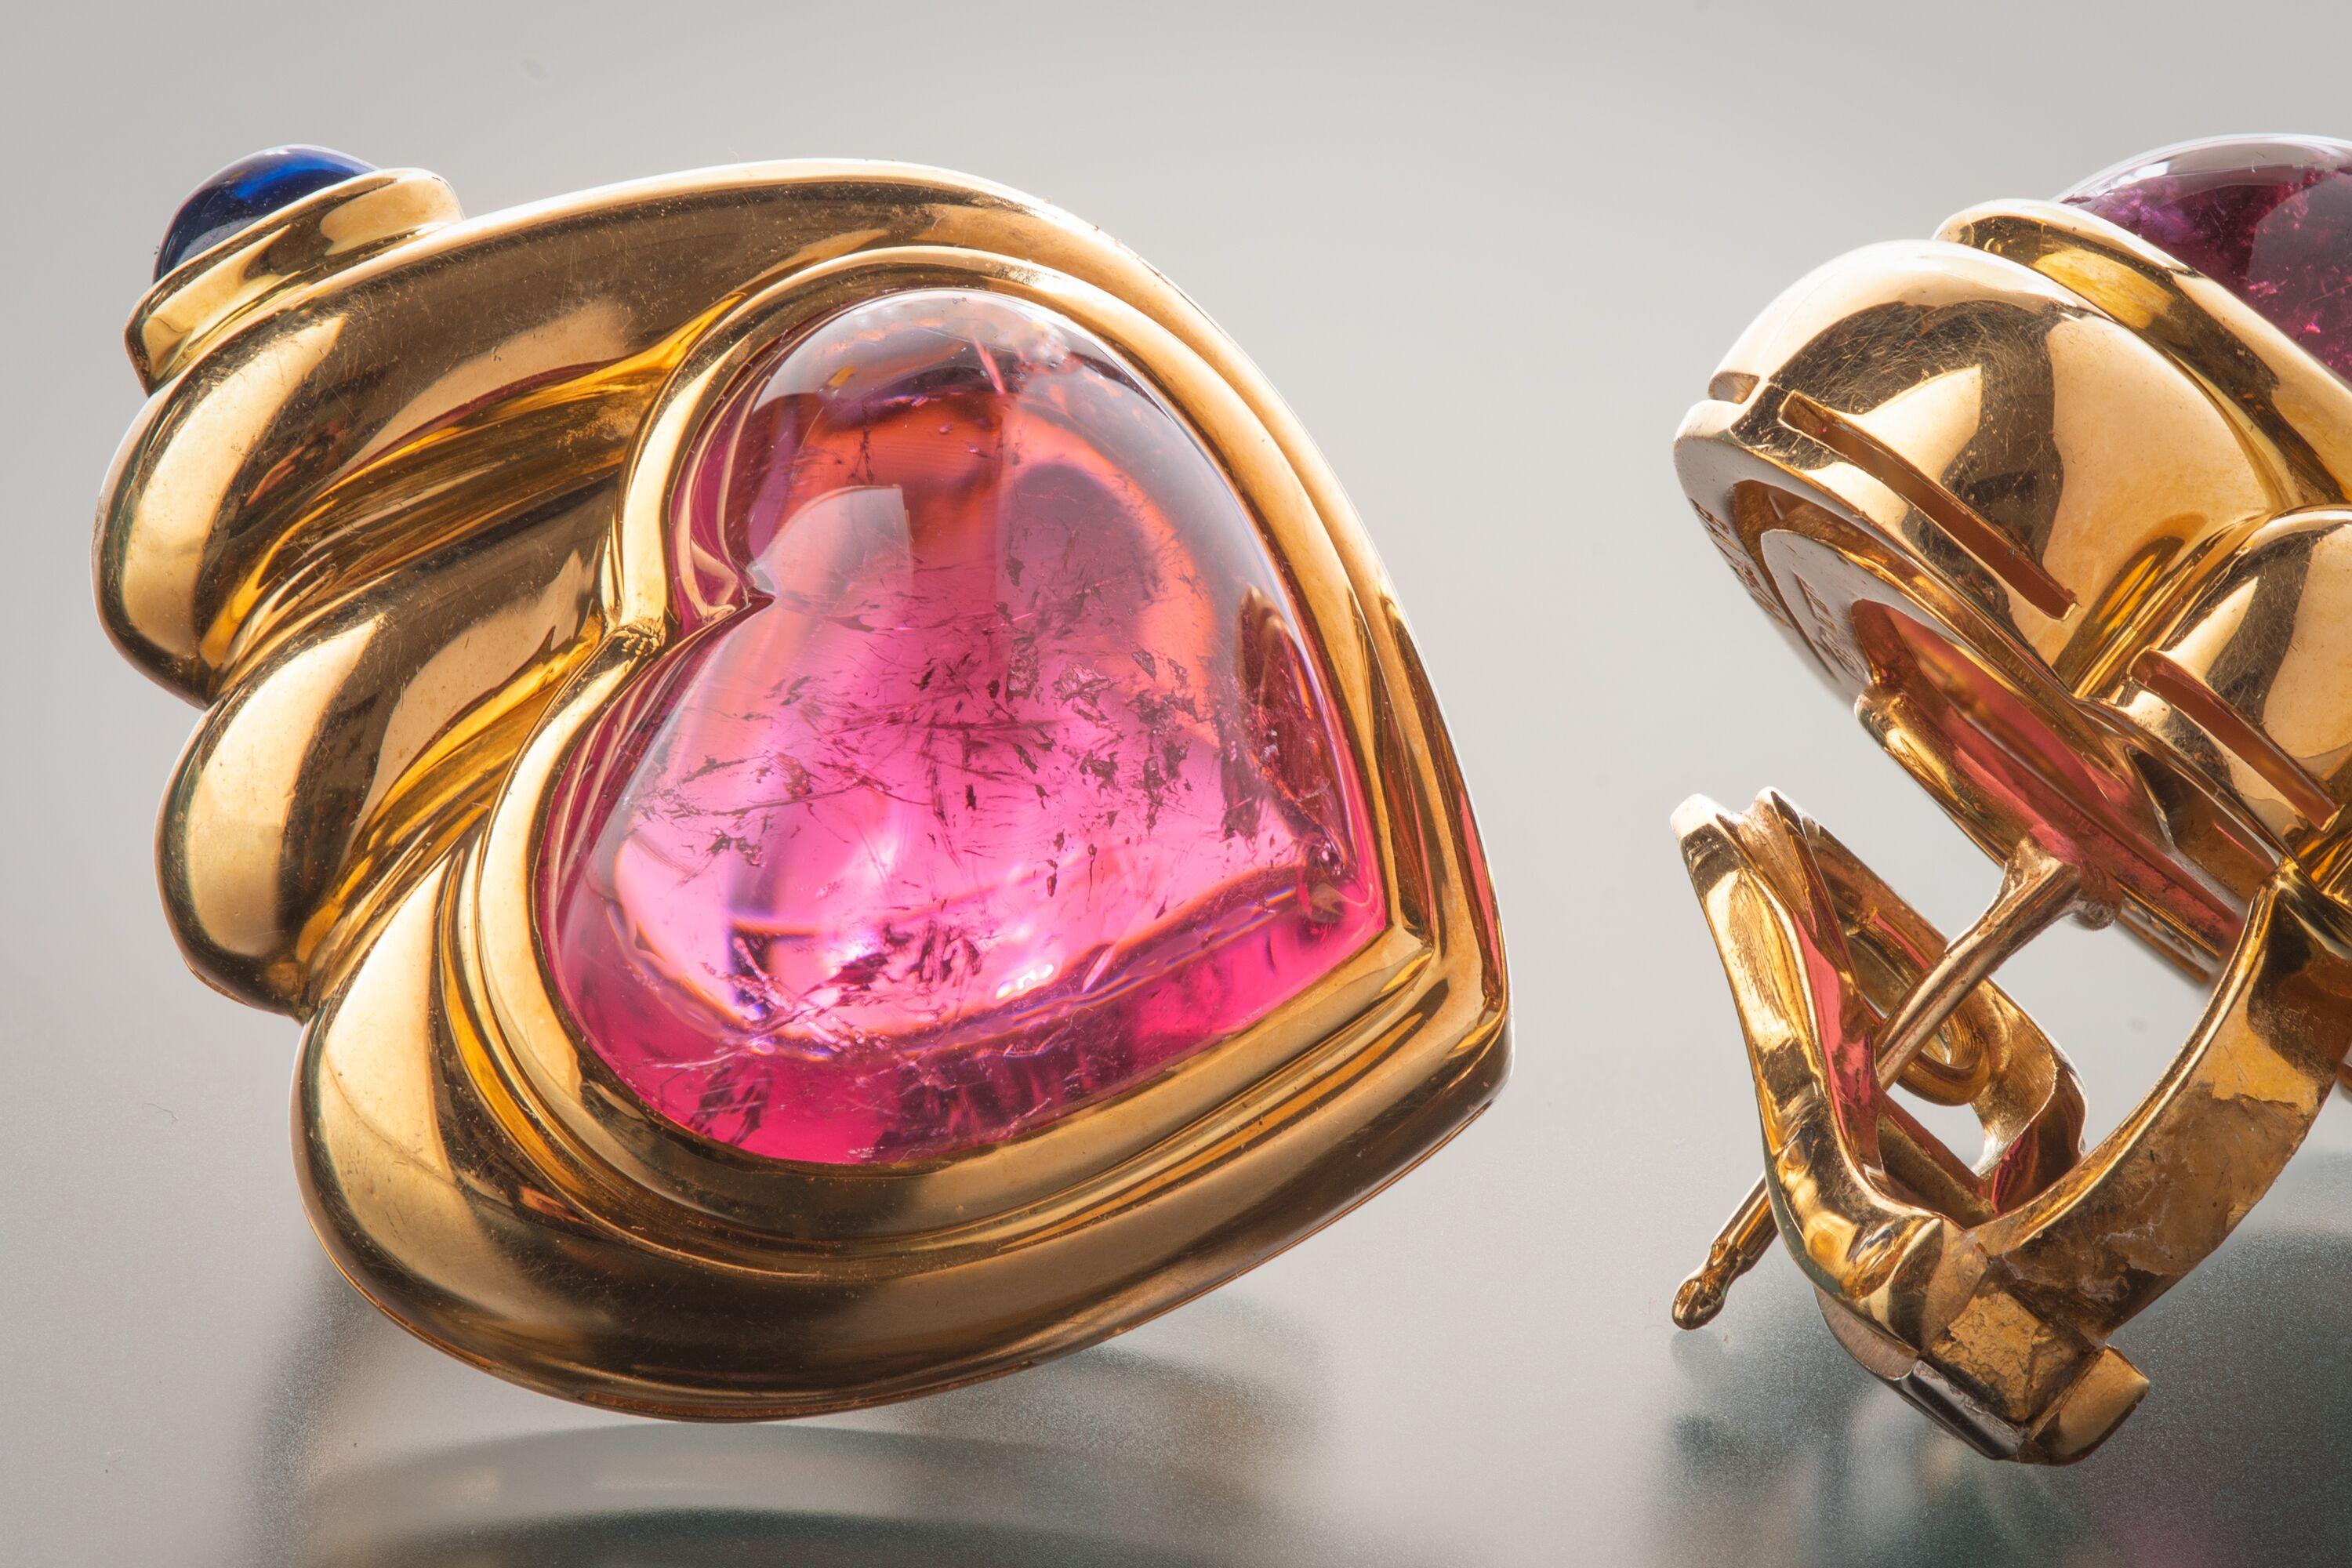 The Bulgari brand is defined by its distinctive and vibrant color combinations. In these earrings pink heart-shaped cabochon tourmalines are set into 18k polished yellow gold swirls punctuated by single bezel-set blue sapphires. 

Length